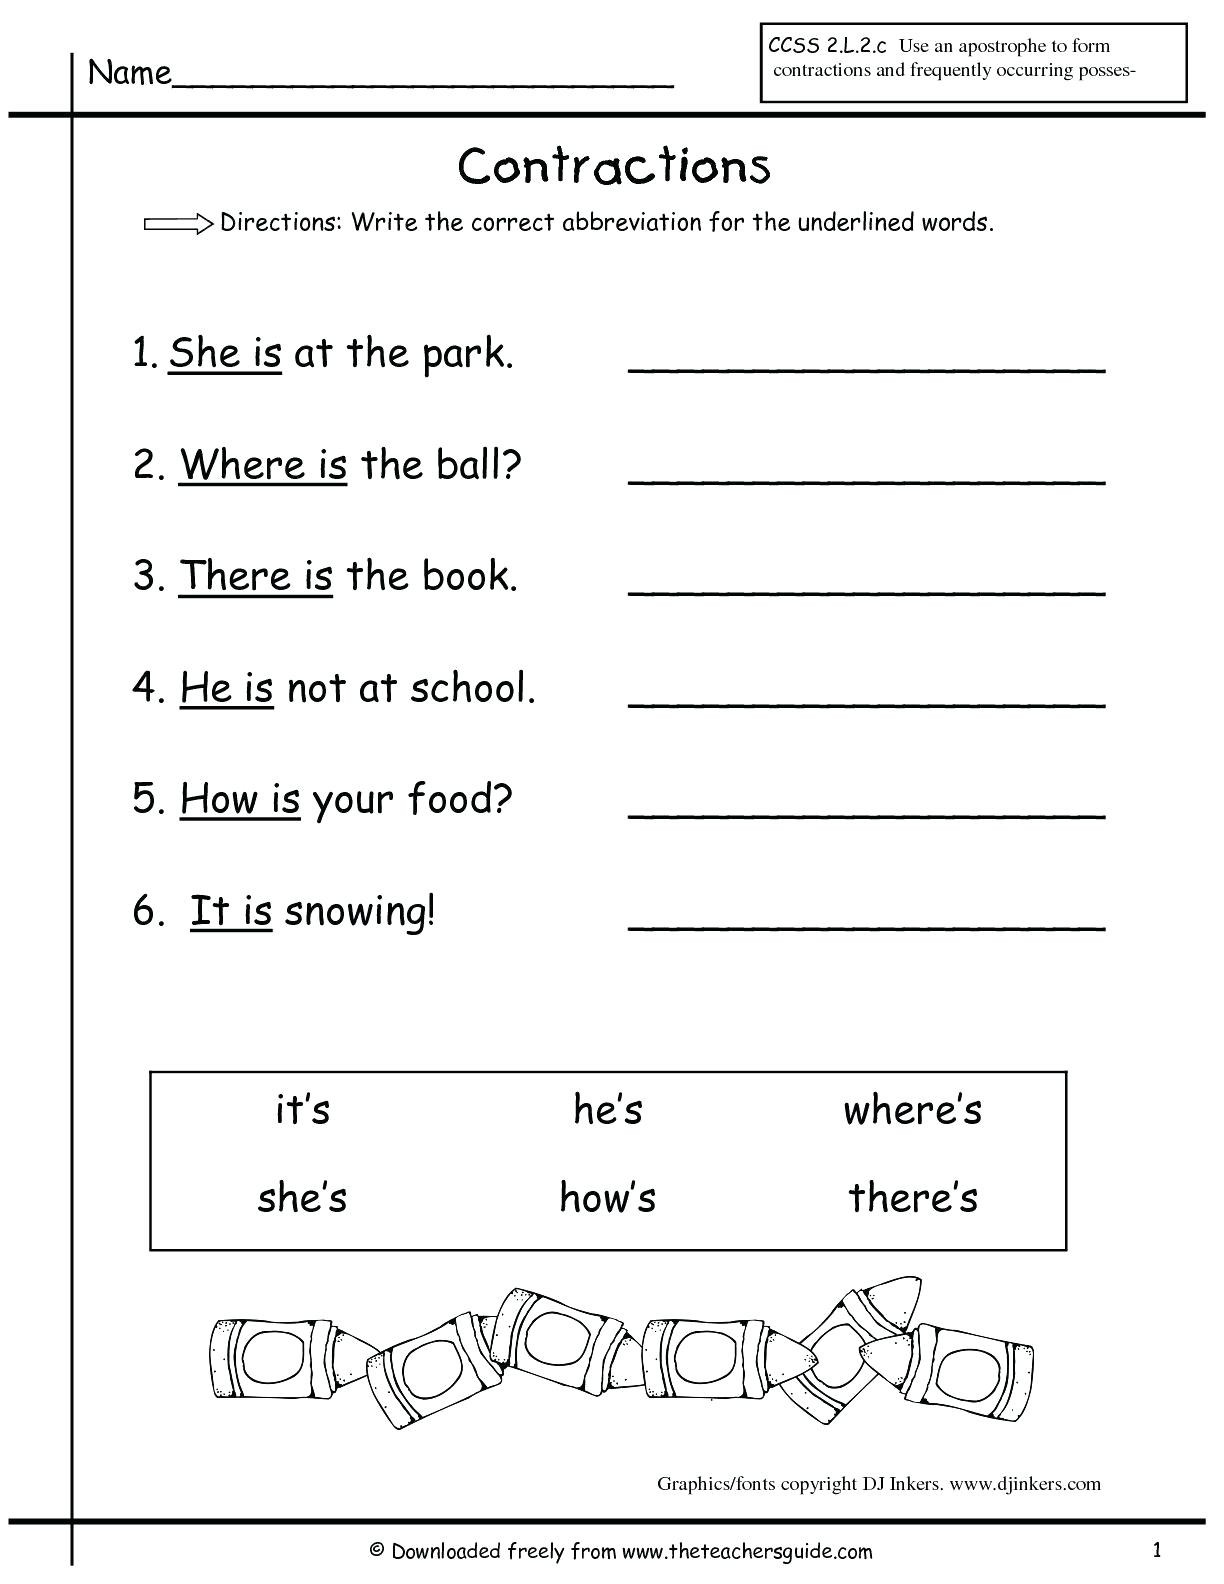 5th Grade Science Practice Worksheets 7th Grade Science Worksheets Pdf Grade Science Worksheets